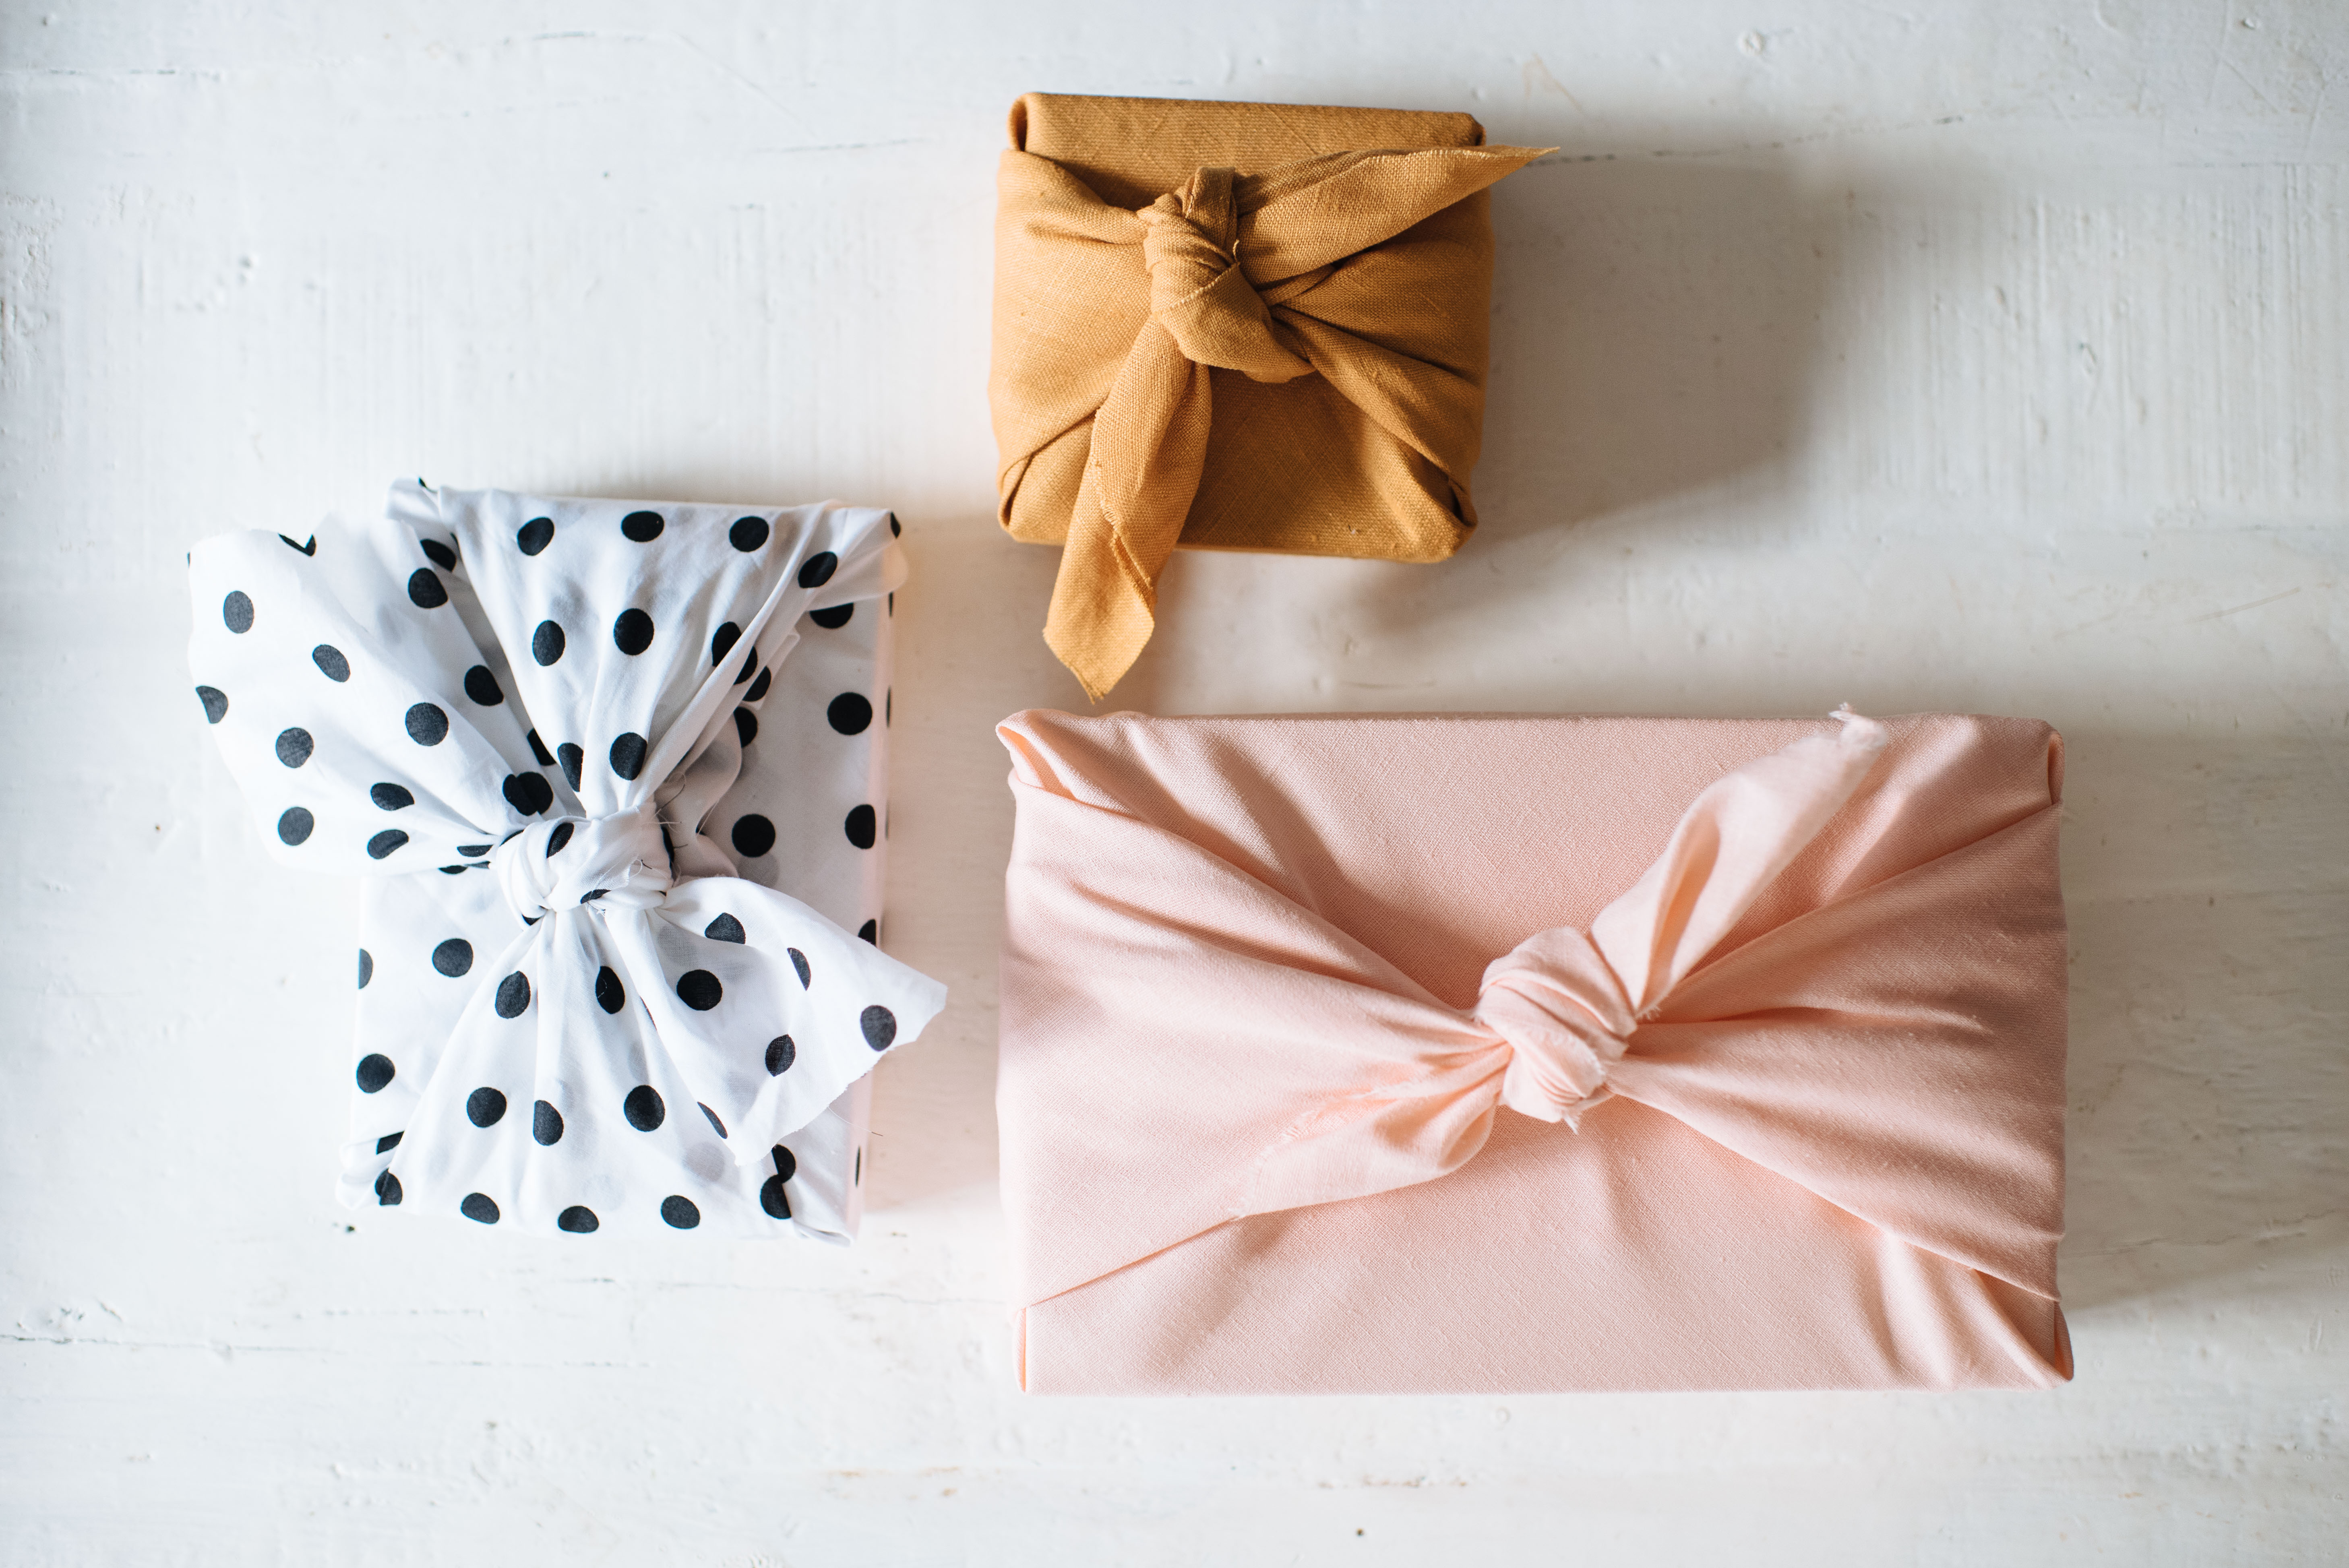 DIY Fabric Wrapped Gifts